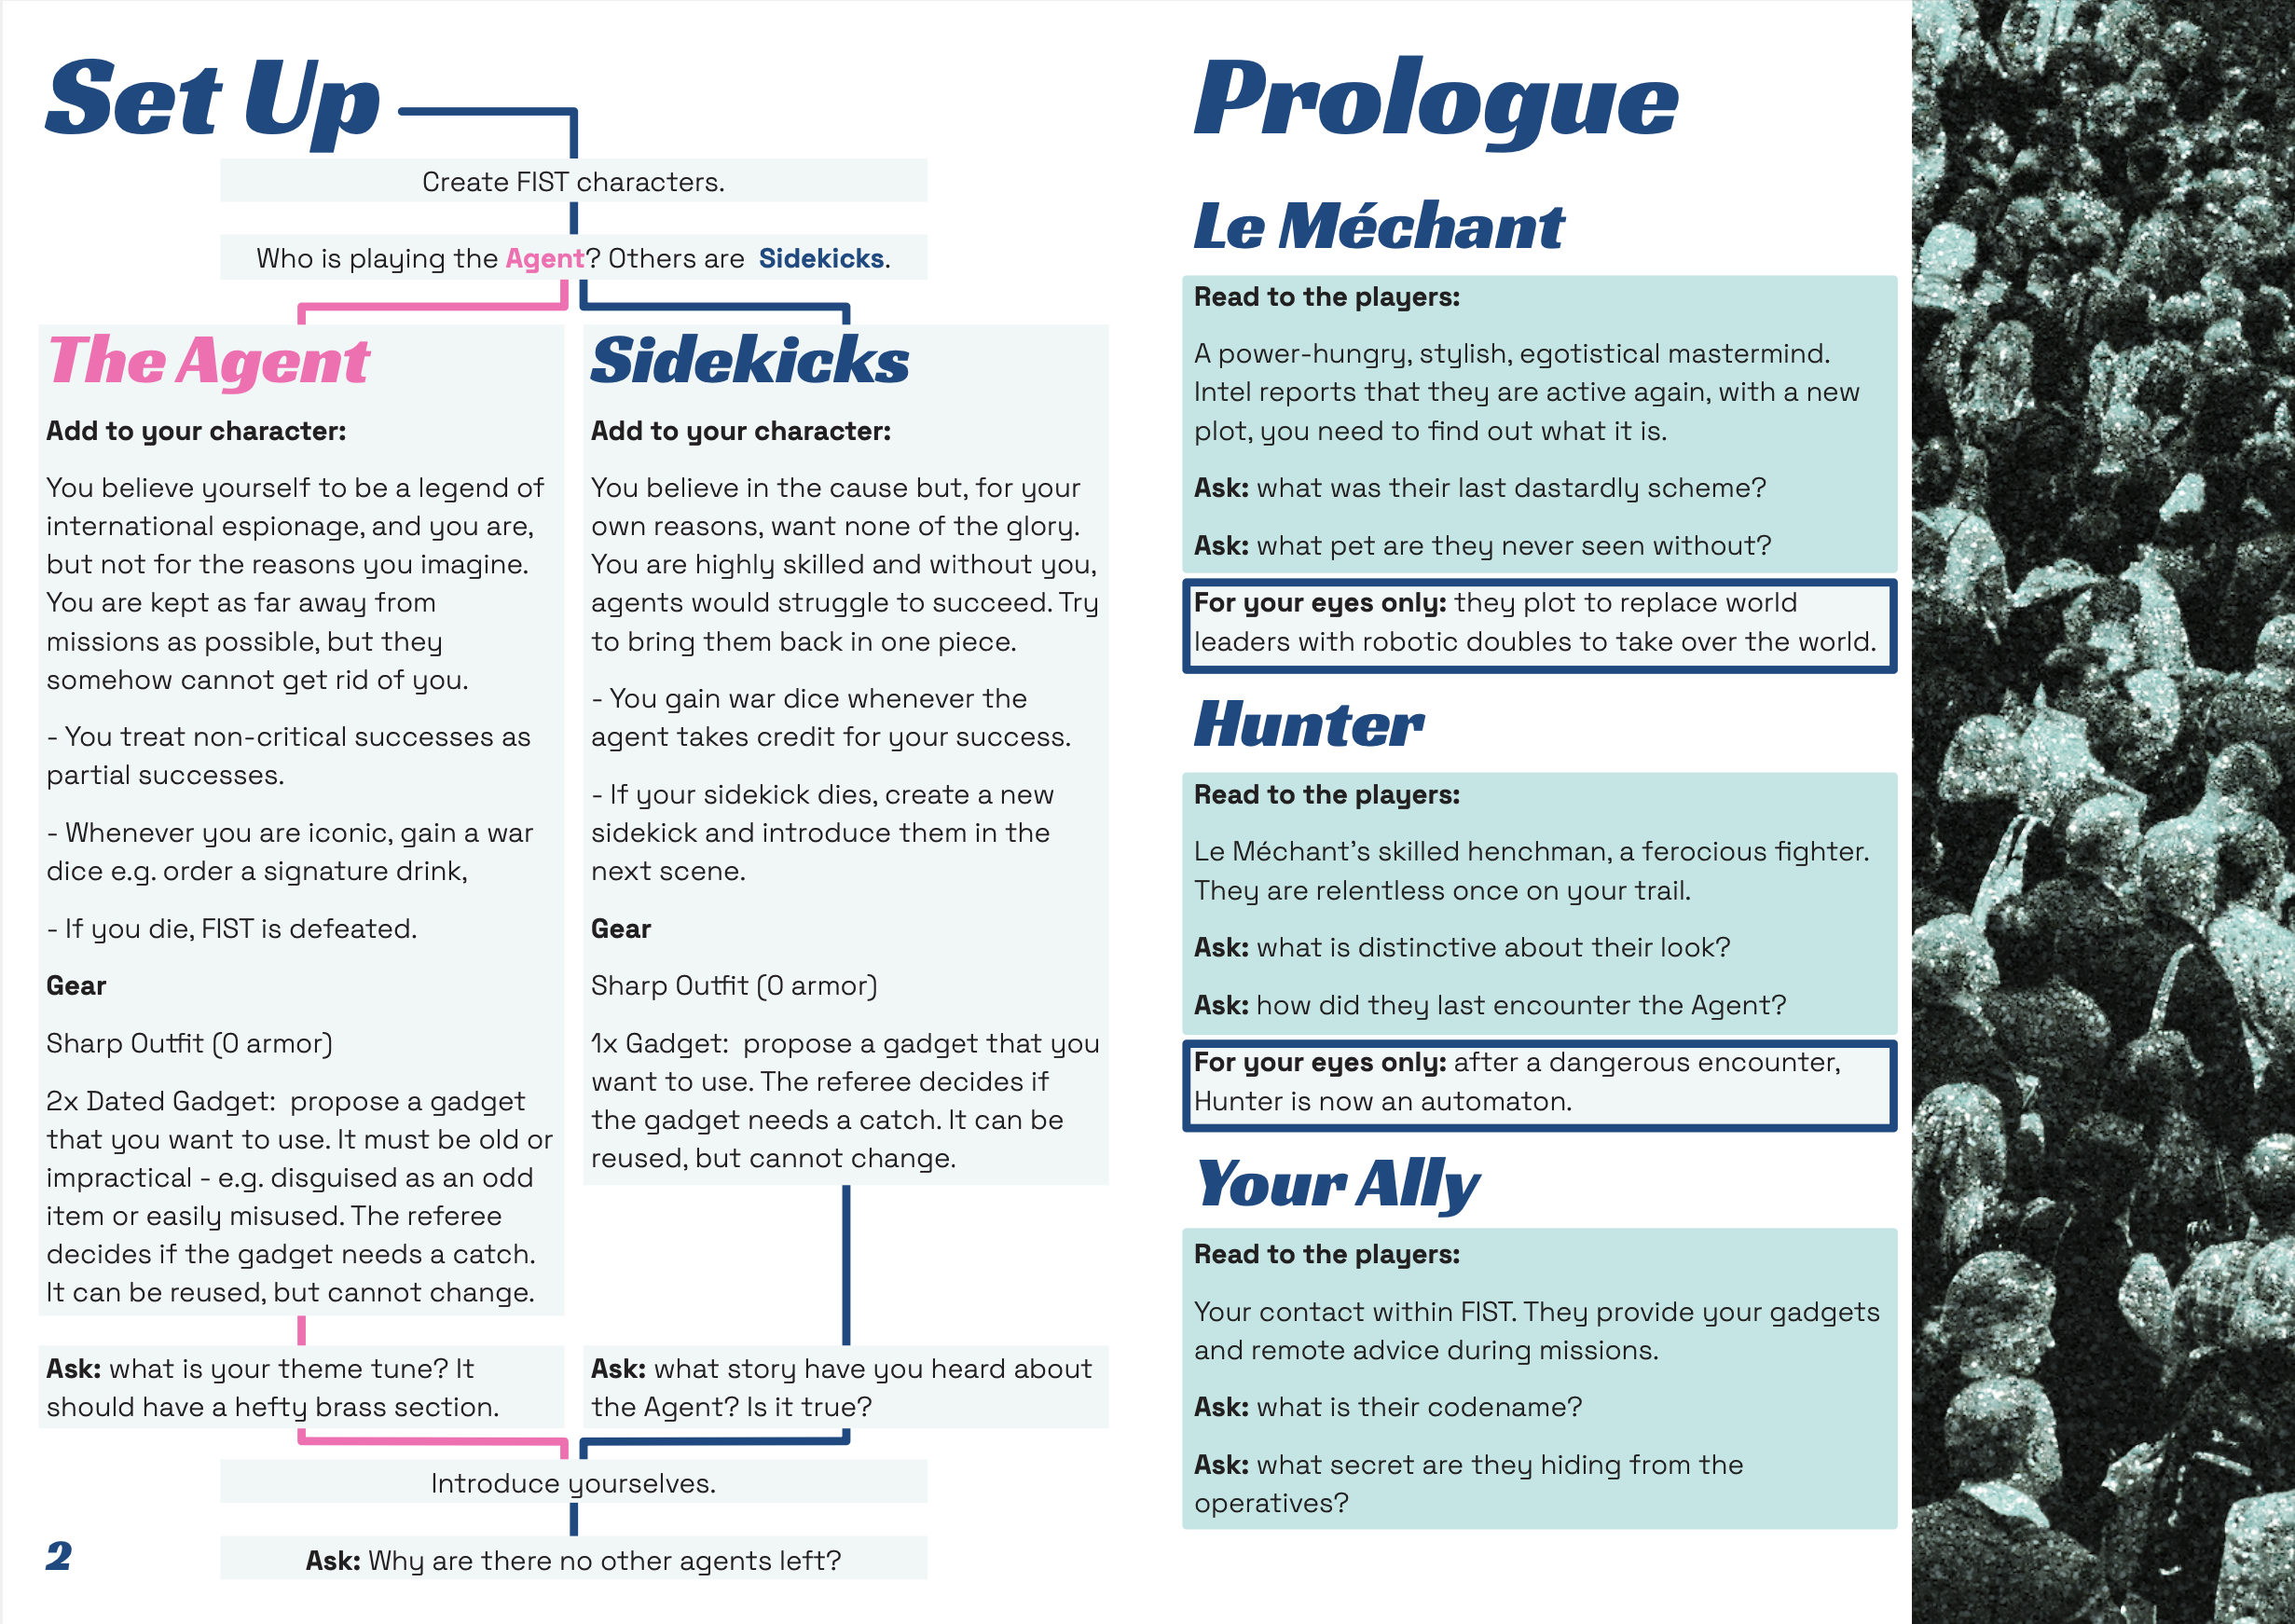 A spread shows set up splitting players into The Agent and Sidekicks, the second page shows a prologue.